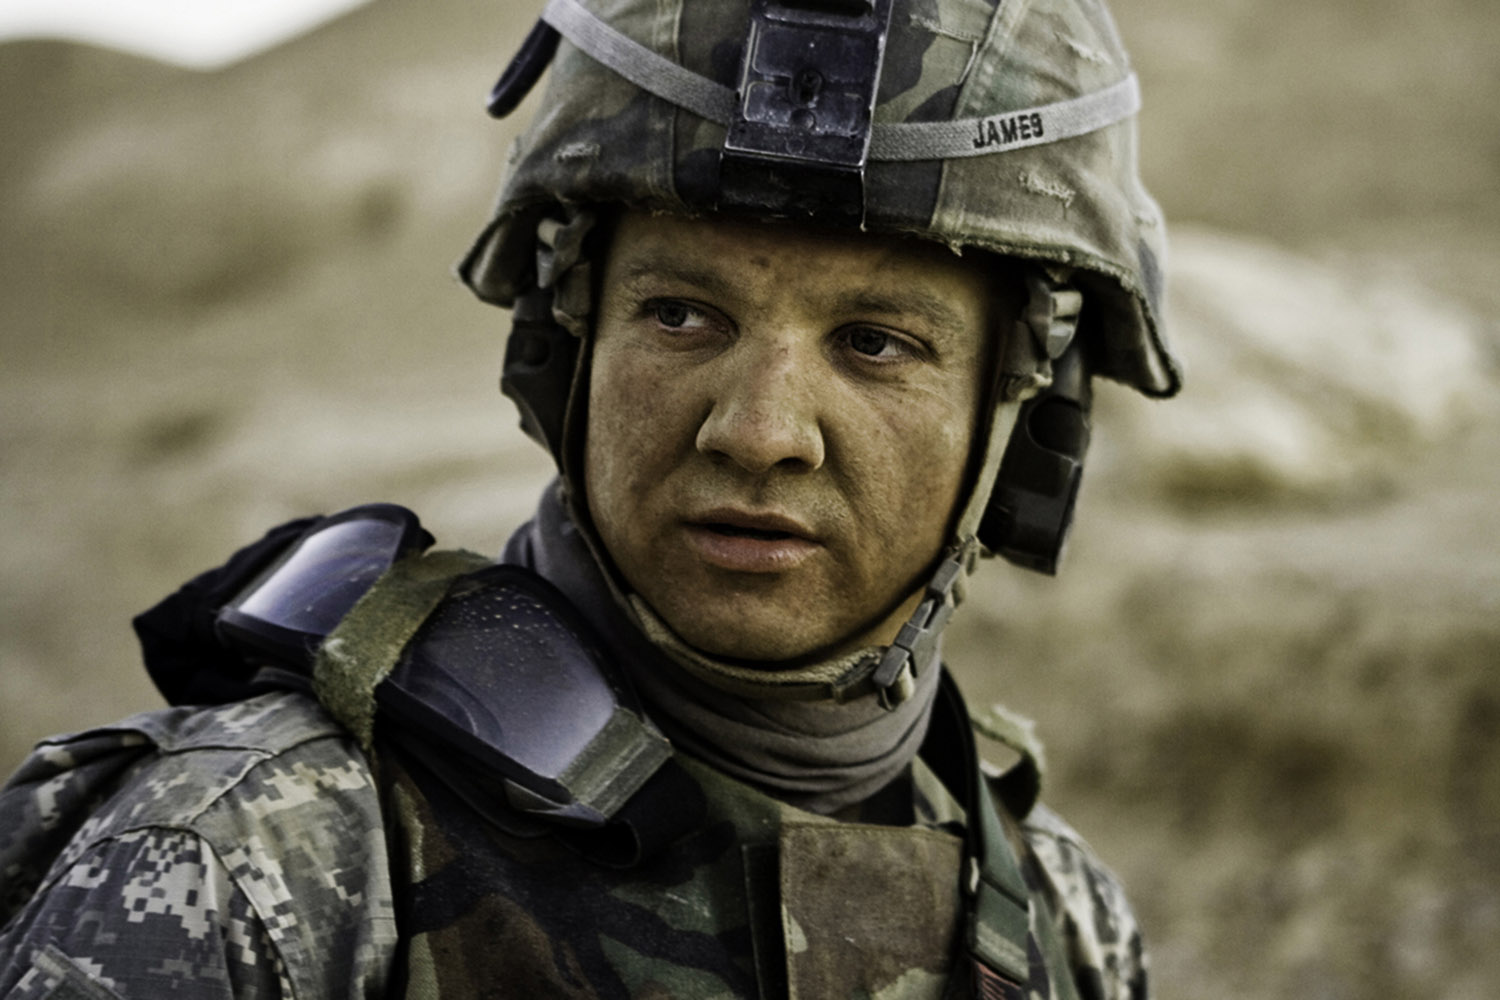 Jeremy Renner in a production still from the film 'The Hurt Locker' directed by Katherine Bigelow. Swaga, Jordan.